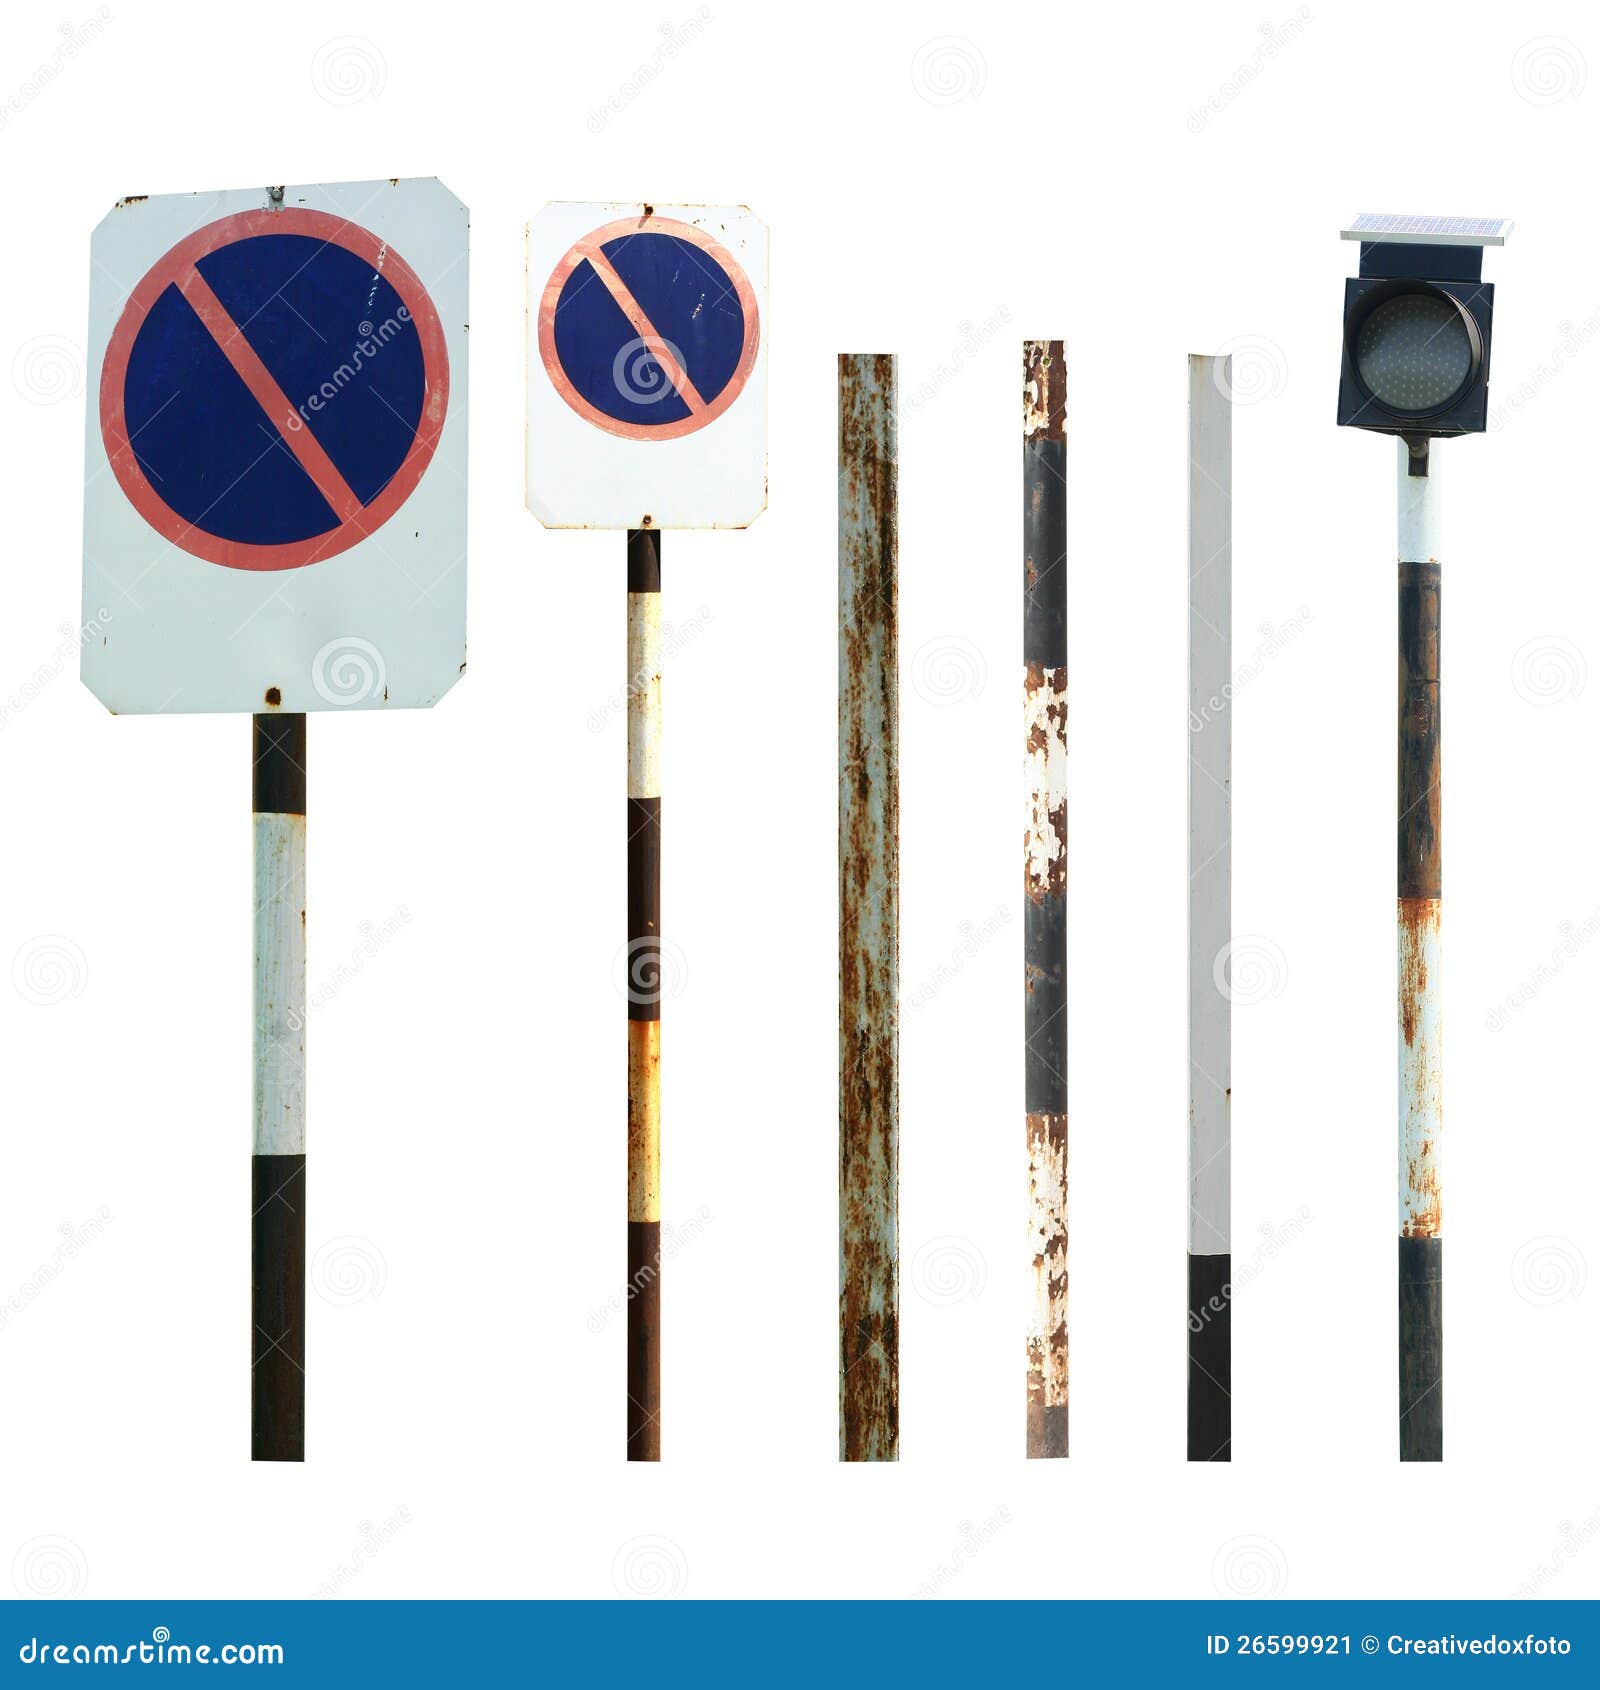 old-traffic-sign-pole-collections-26599921.jpg